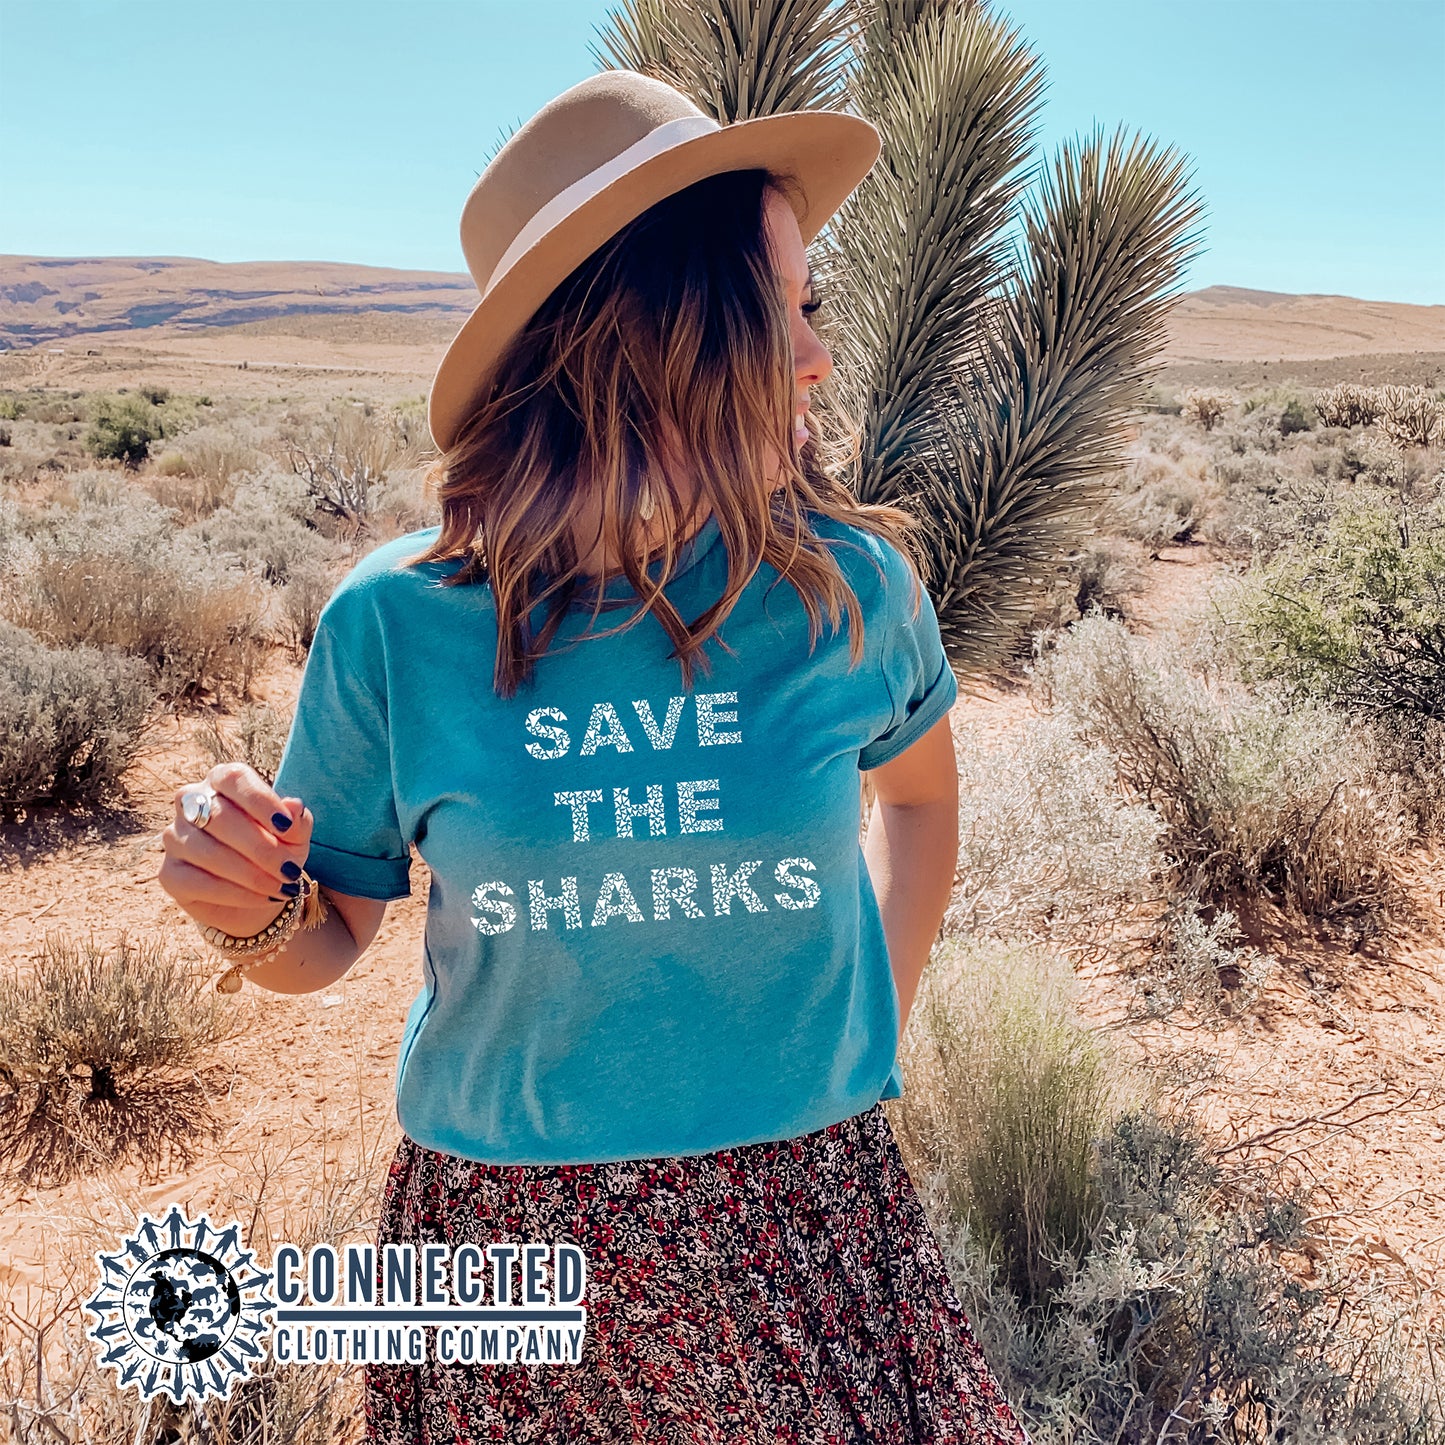 Aqua Blue Save The Sharks Short-Sleeve Unisex T-Shirt reads "Save The Sharks." - nighttidemetalworks - Ethically and Sustainably Made - 10% donated to Oceana shark conservation